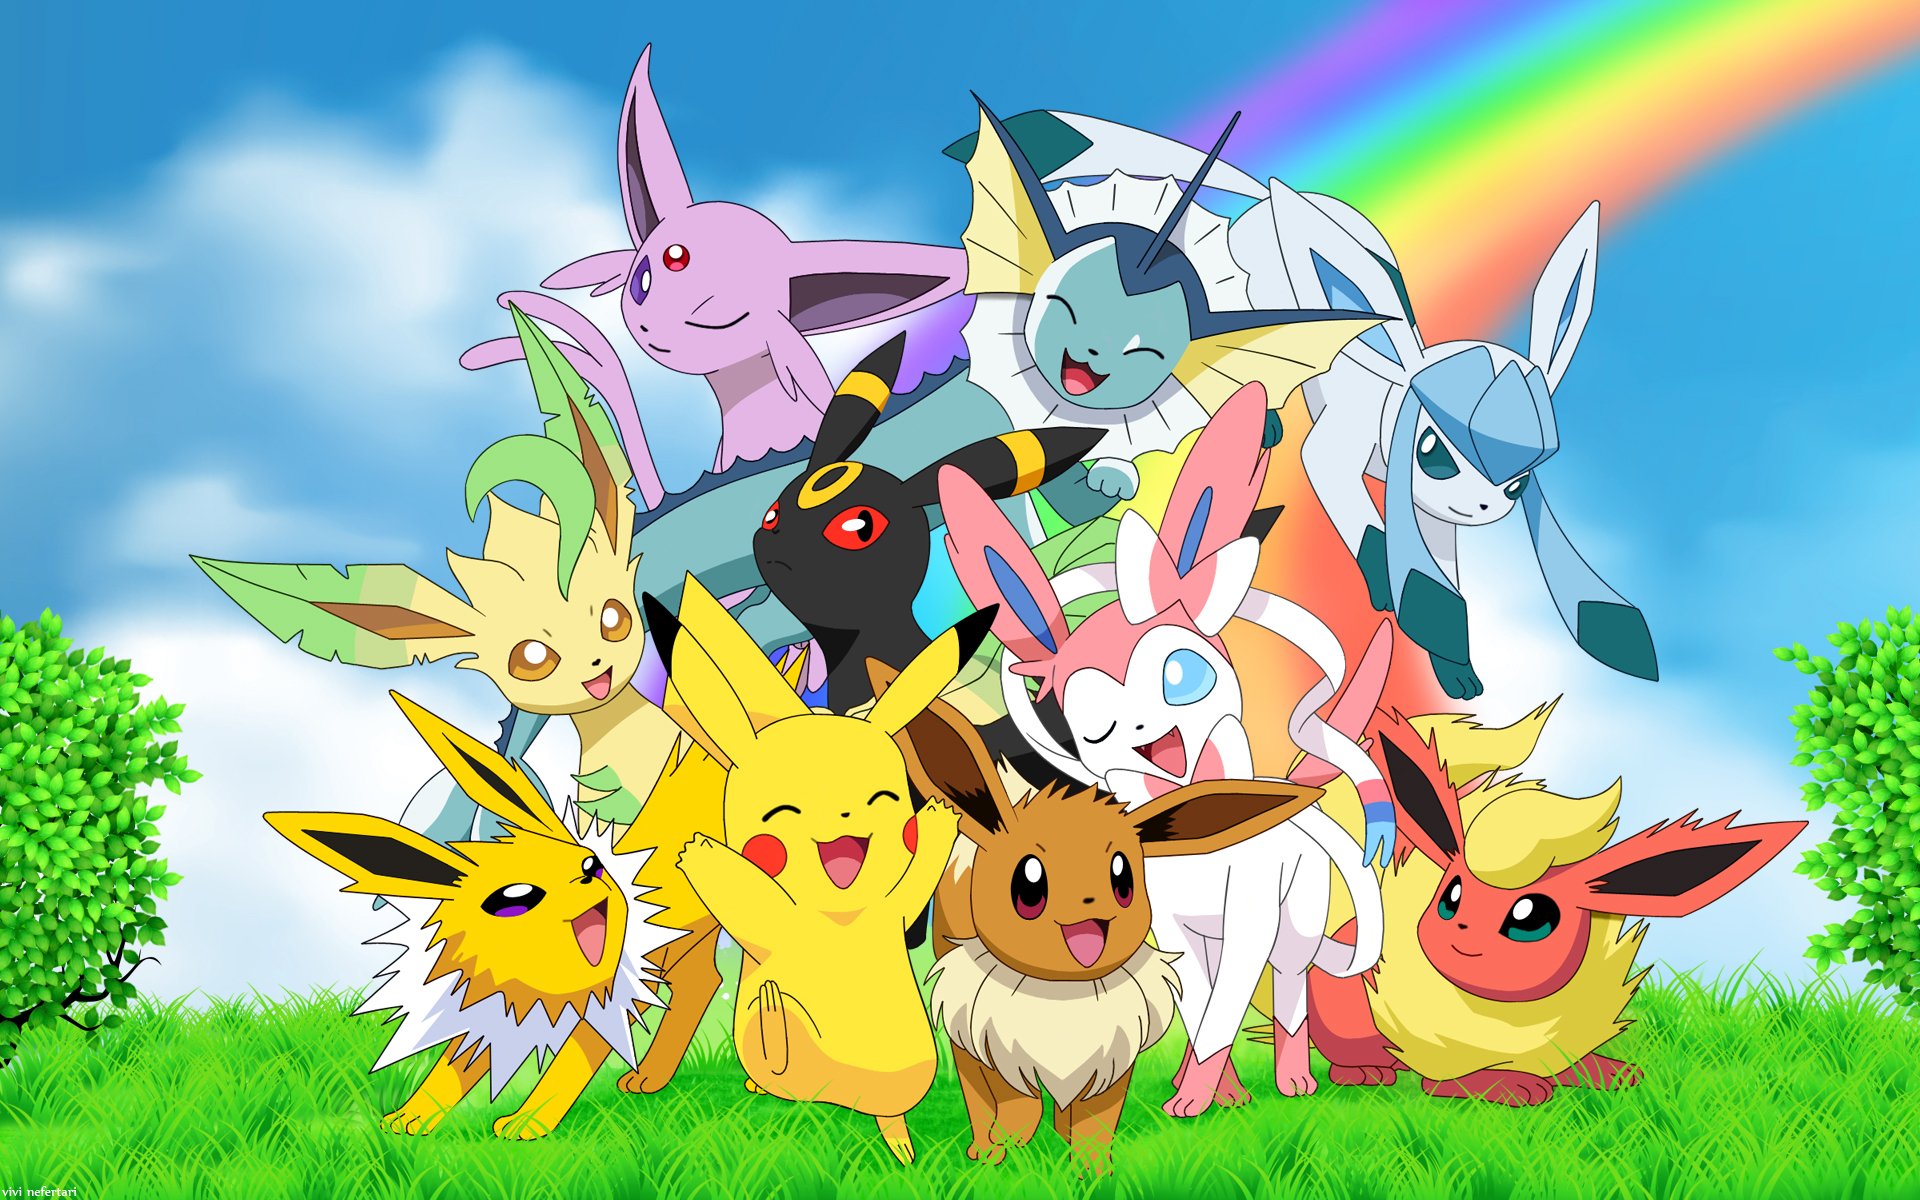 Pokémon Wallpaper: At The End Of The Rainbow